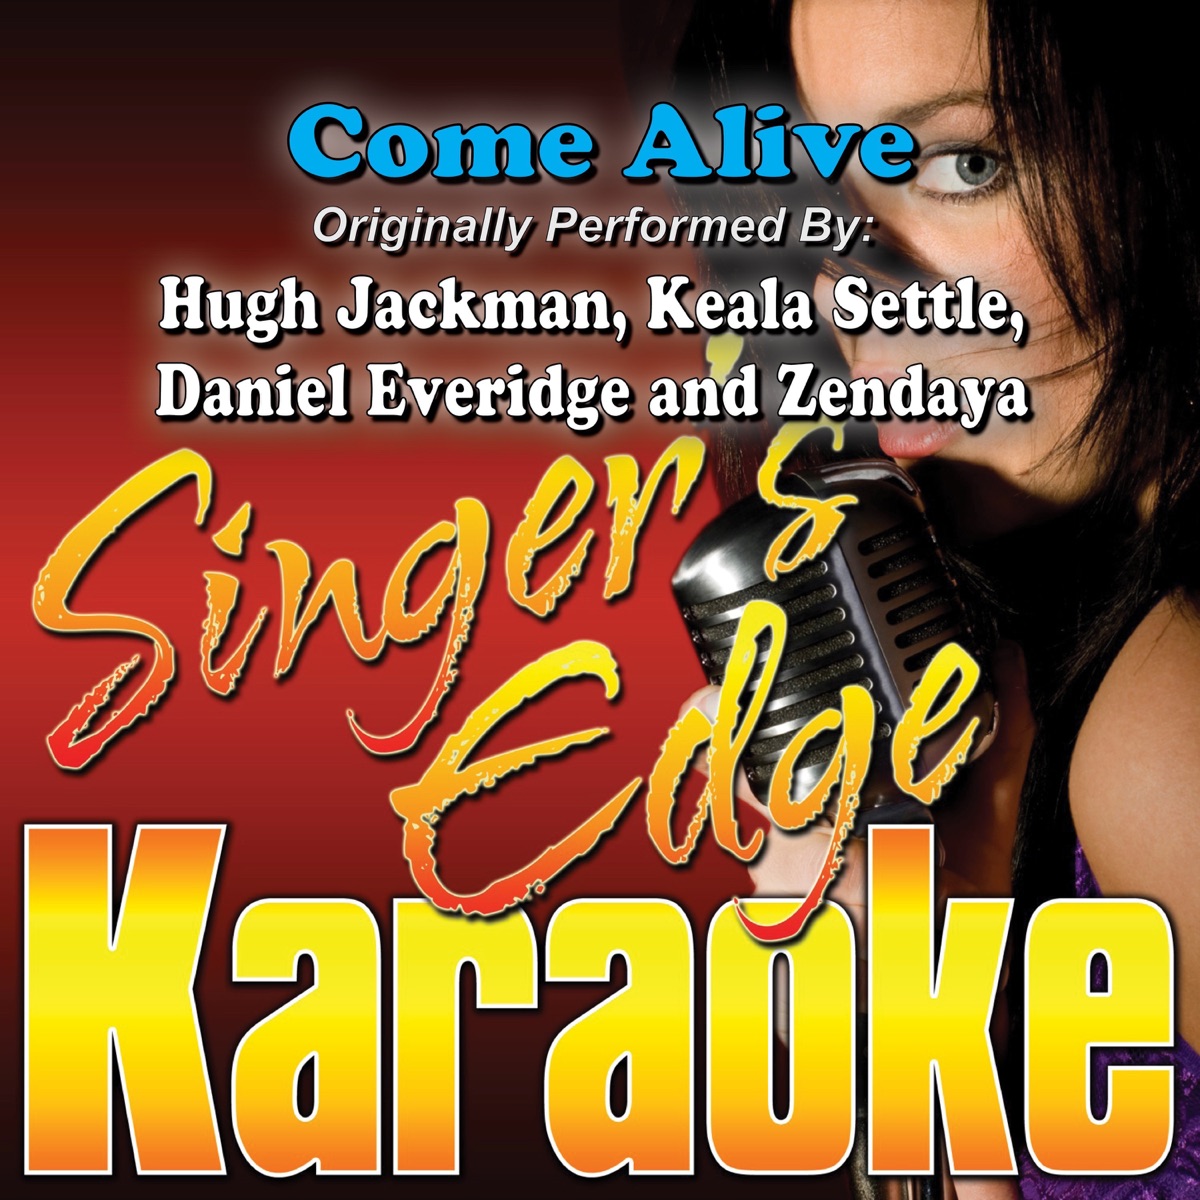 All Or Nothing (Originally Performed By Athena Cage) [Karaoke Version] -  Single by Singer's Edge Karaoke on Apple Music